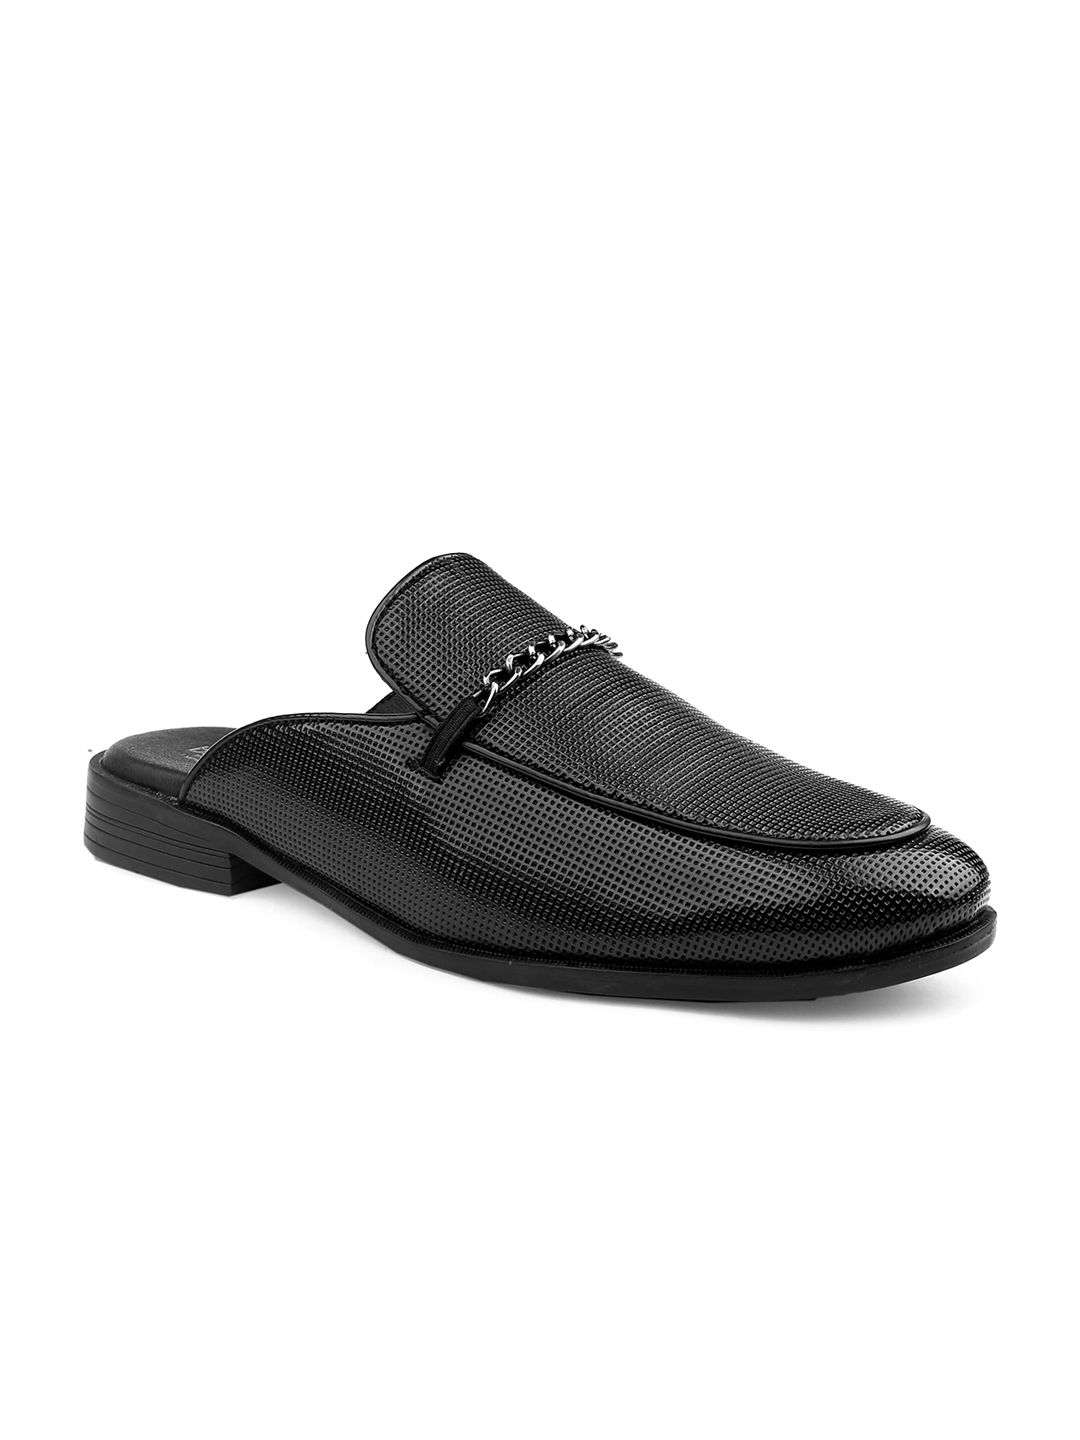 Loafer Shoes - Buy Latest Loafer Shoes For Men- Bacca Bucci